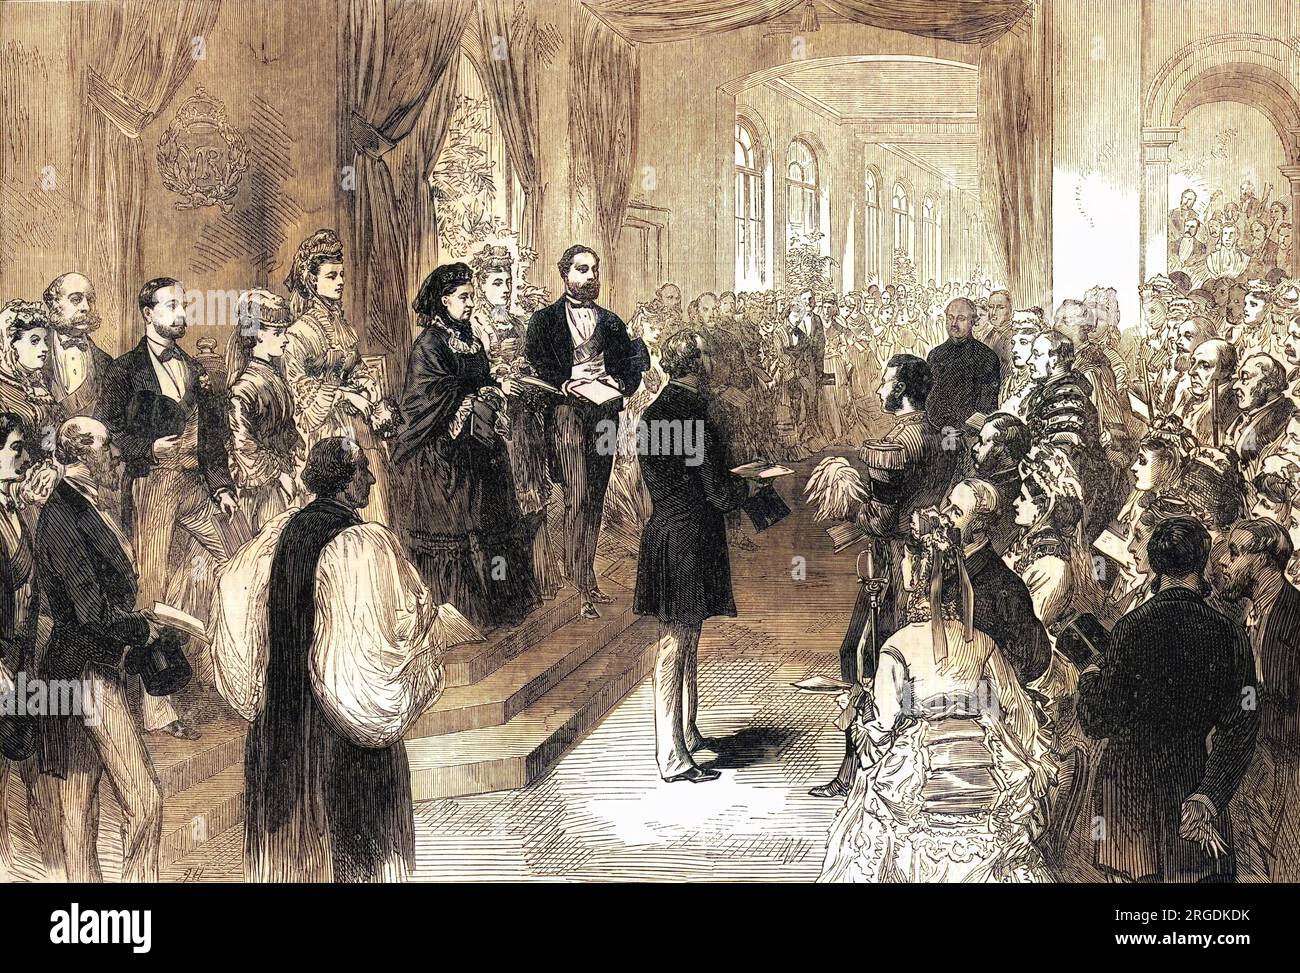 Queen Victoria opens the newly completed St Thomas' Hospital, situated on the southern Thames Embankment in Lambeth, London, across the river from the Palace of Westminster. The Queen had laid the foundation stone in May 1868. Stock Photo